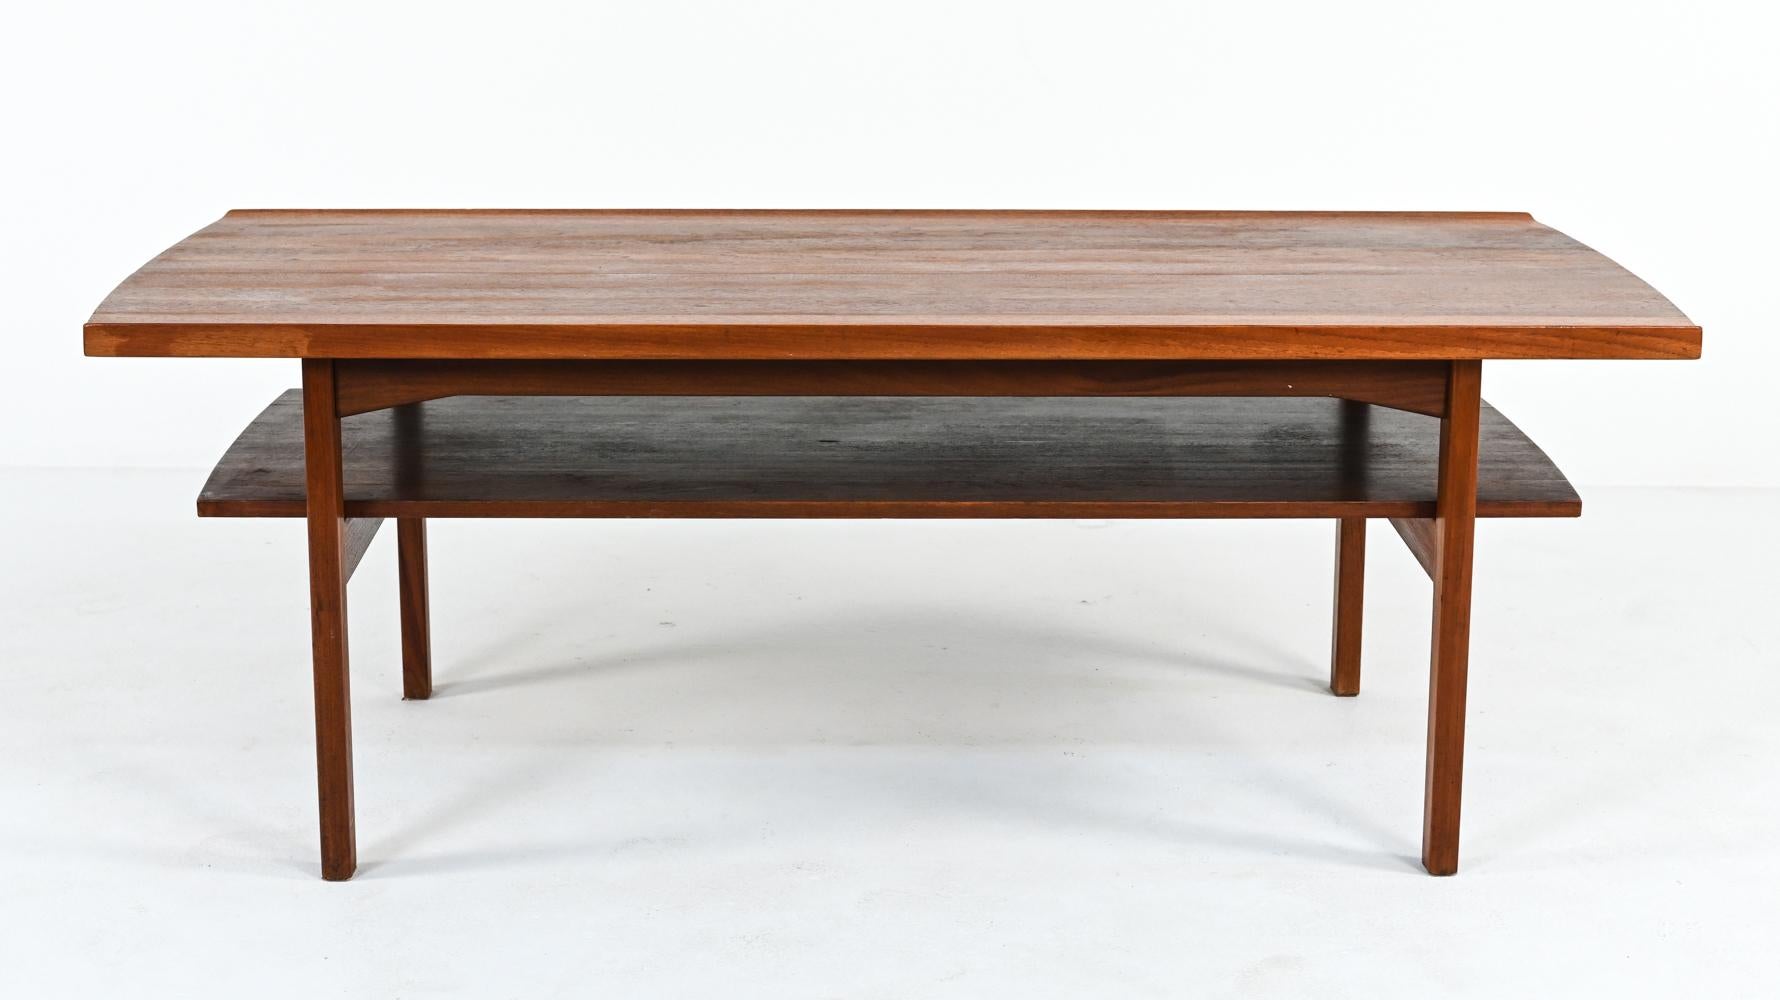 Situated at the perfect height for board games or cocktails, this beautiful table represents the pinnacle of Scandinavian craftsmanship and design. Its two tiers are crafted from solid teak panels and joined by visible tenons. The top is sculpted